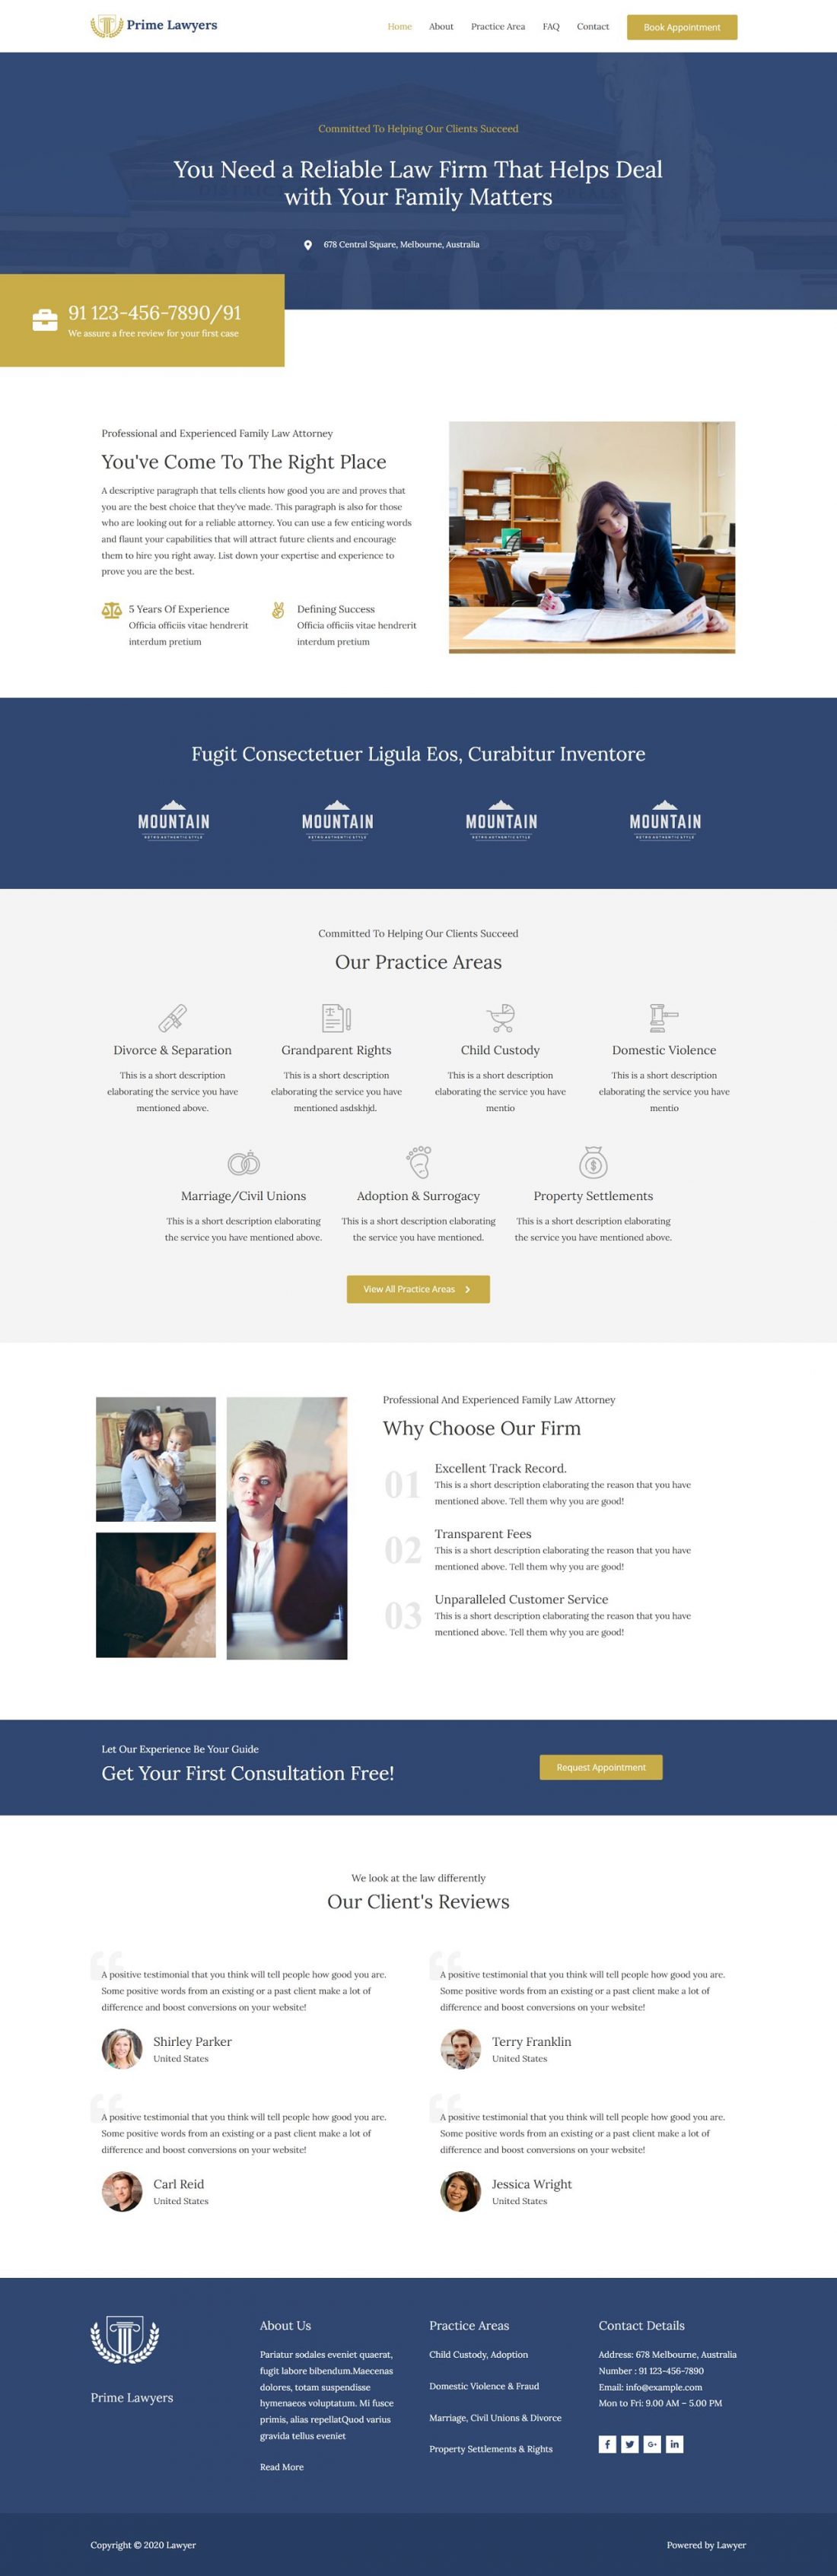 Fagowi.com Website Design Templates For Lawyer - Home Page Image